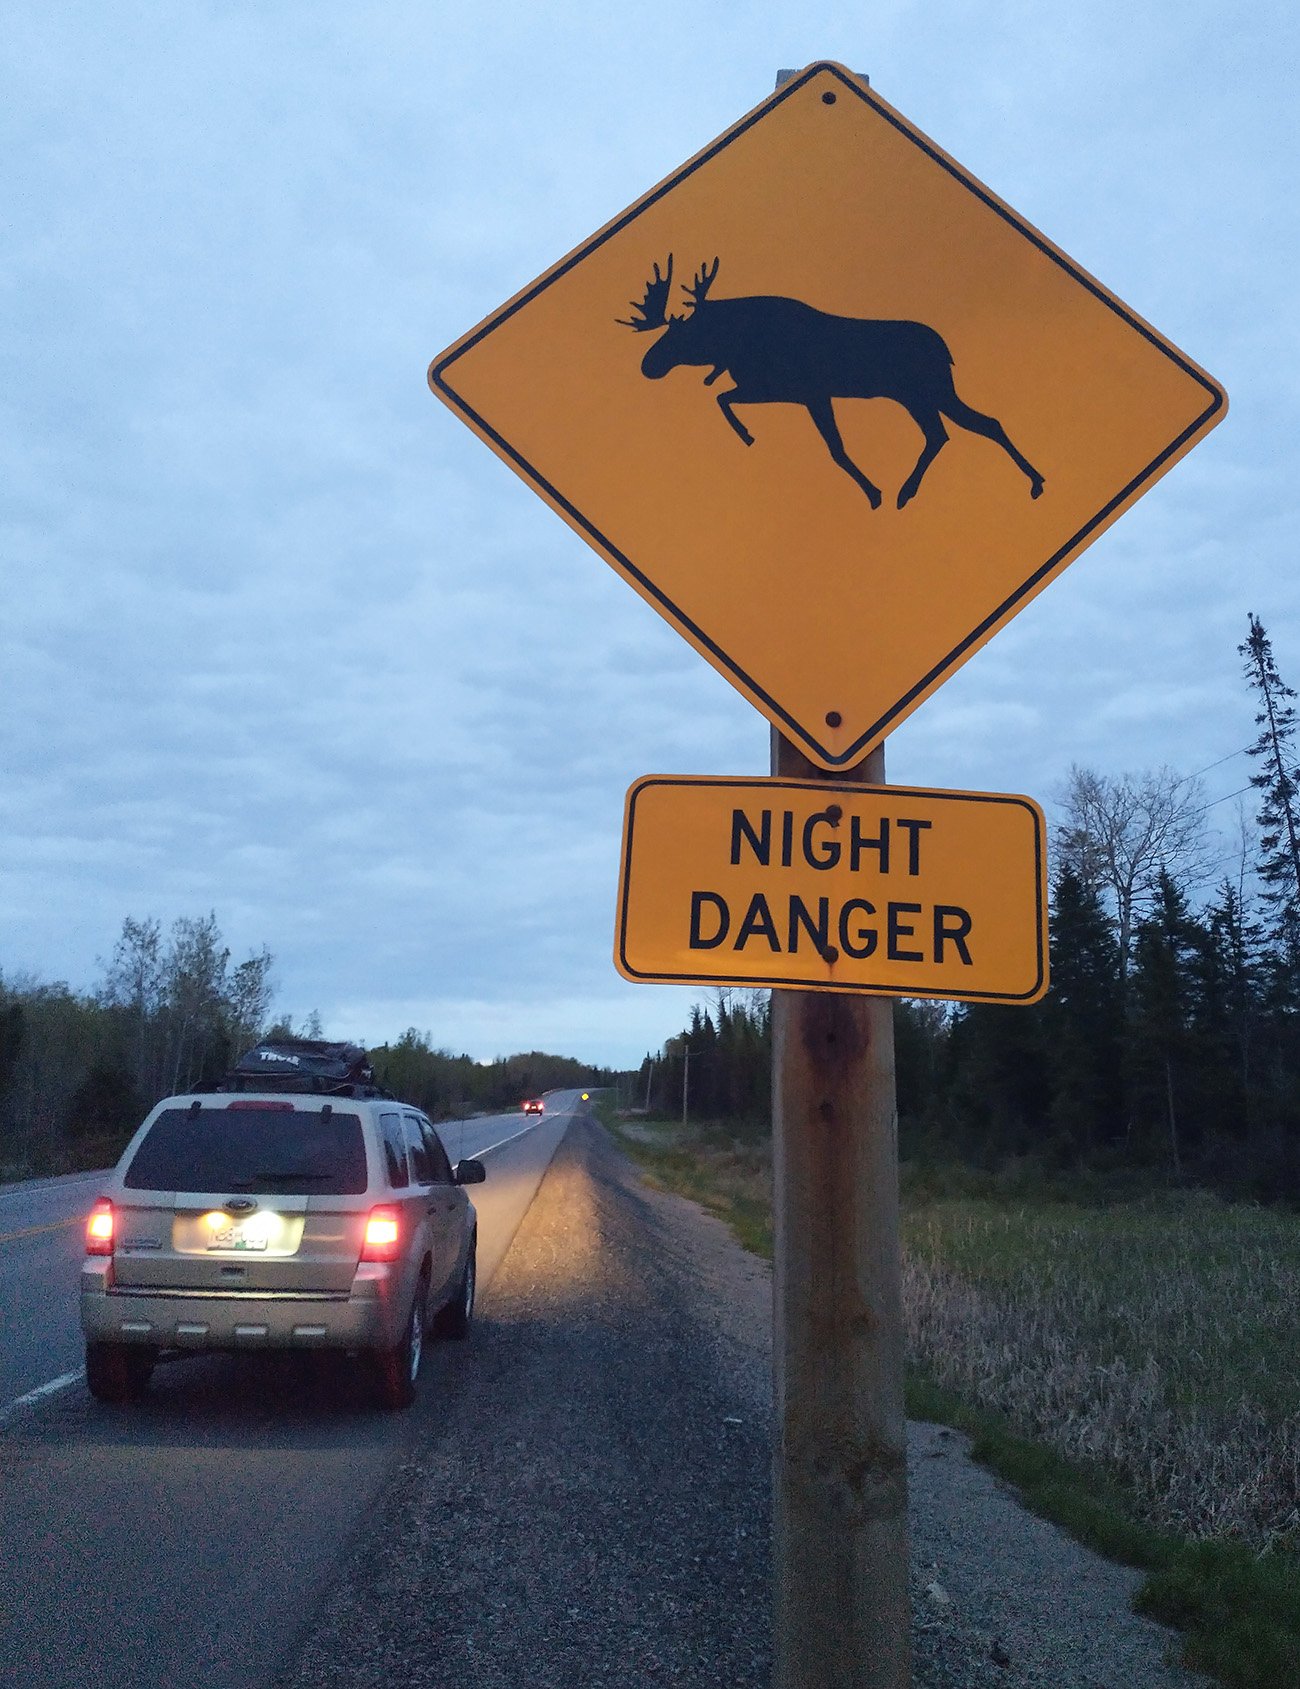 These signs are everywhere in Northern Ontario. They wait for the darkness to go after your car.